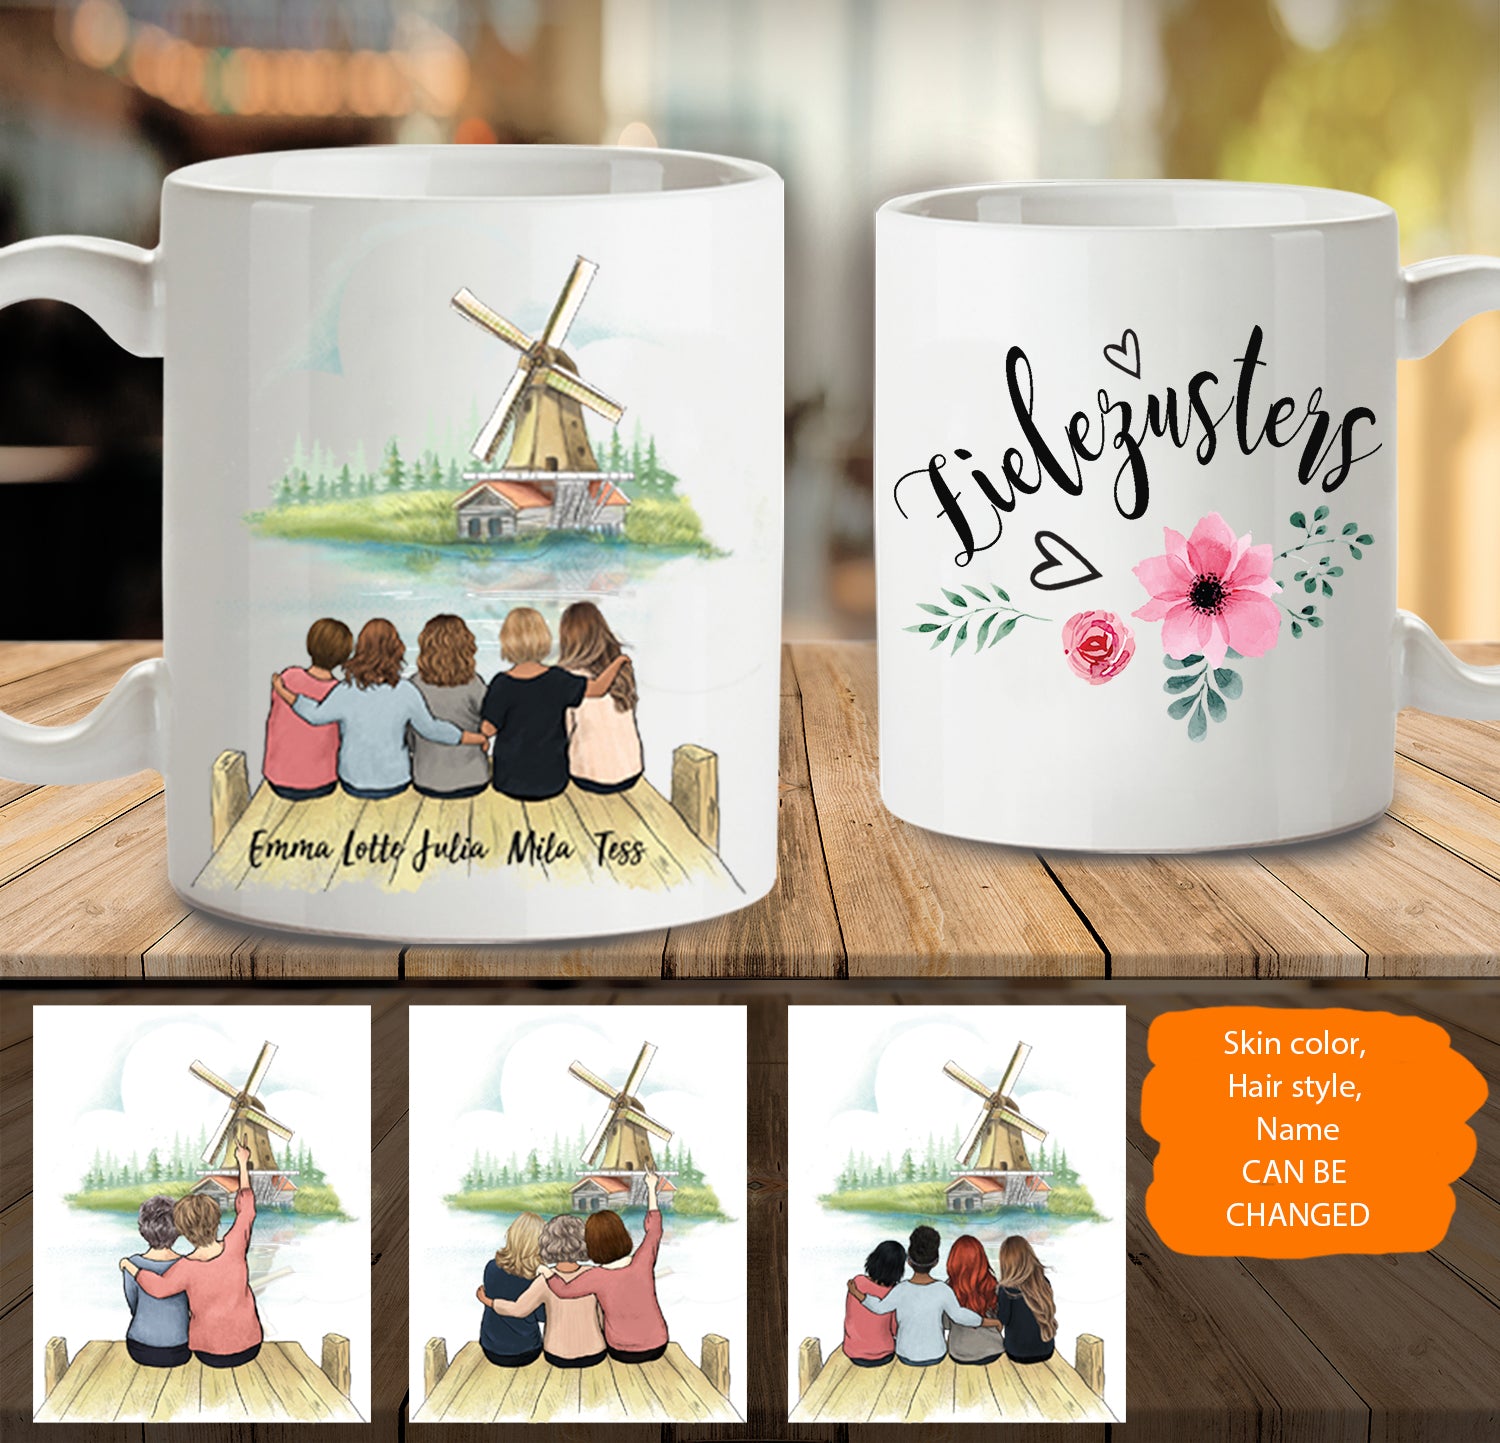 Buy Indigifts Xmas Gift Items for Friends Our Friendship is Timeless Quotes  Printed Frosted Mug 325 ml, Frosted Glass Mug, Frosted Mug for Gift,  Christmas Gift for Friends, Secret Santa Gift for